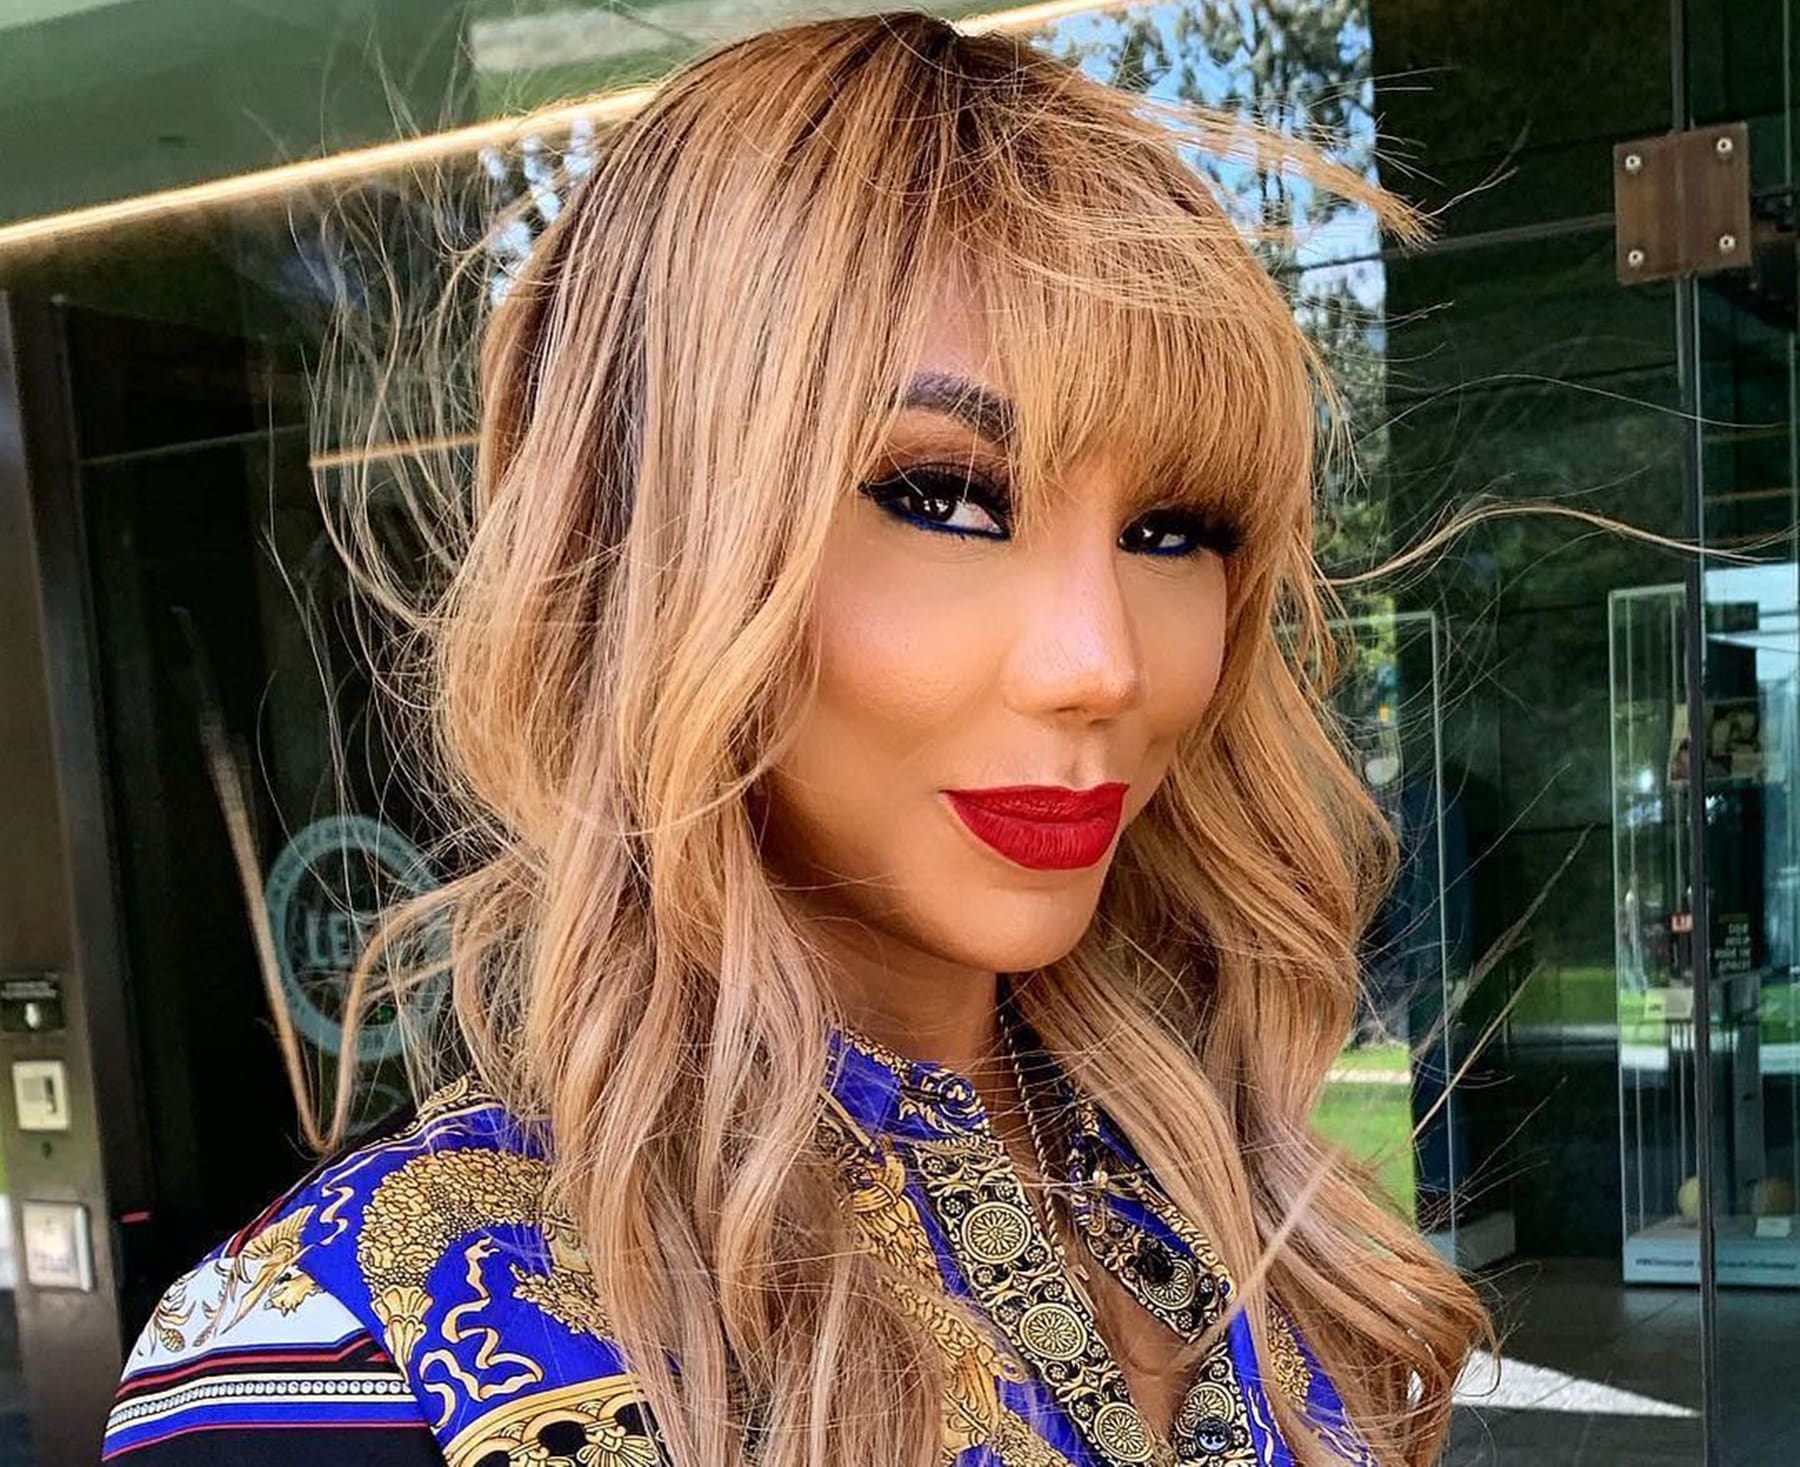 Tamar Braxton's Latest Photo In Which She's Wearing Nothing But Earrings Has People Confusing Her With Toni Braxton; David Adefeso Is In Awe - See His Romantic Comment